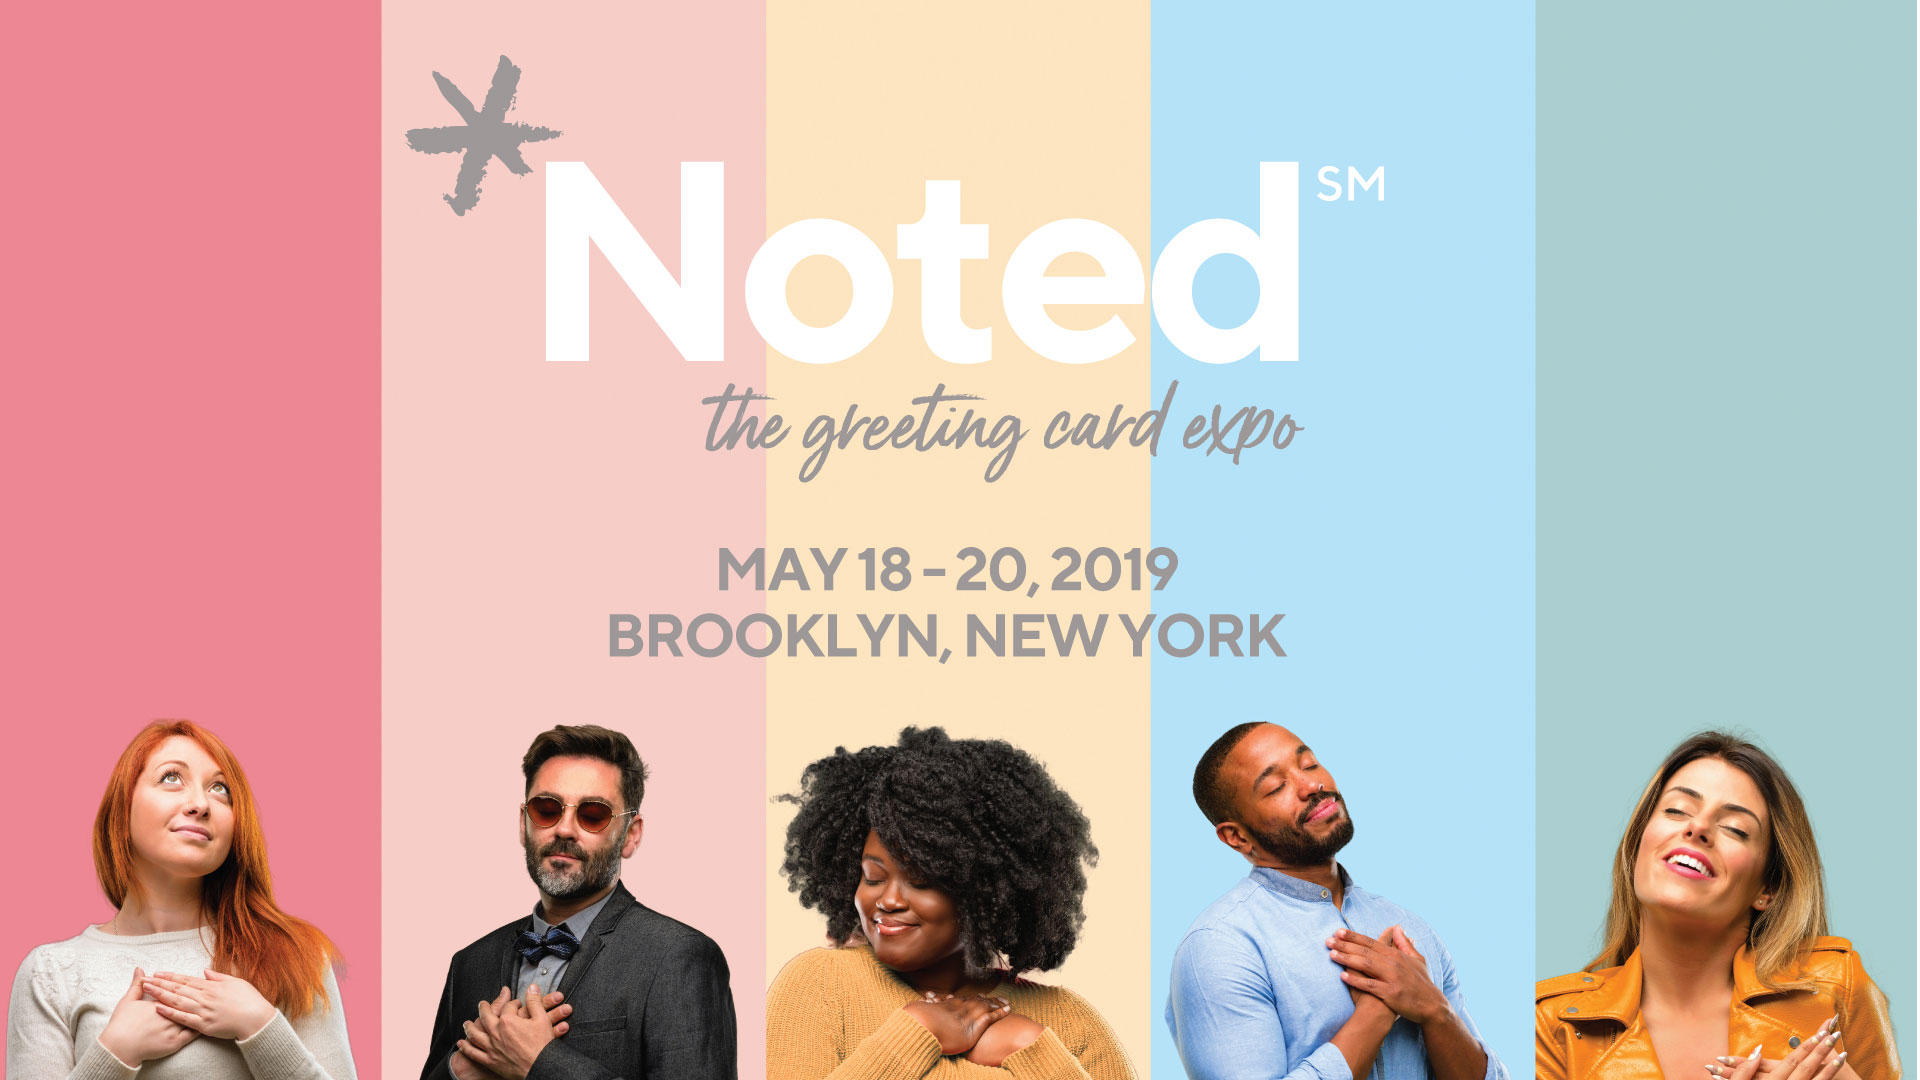 Noted: The Greeting Card Expo